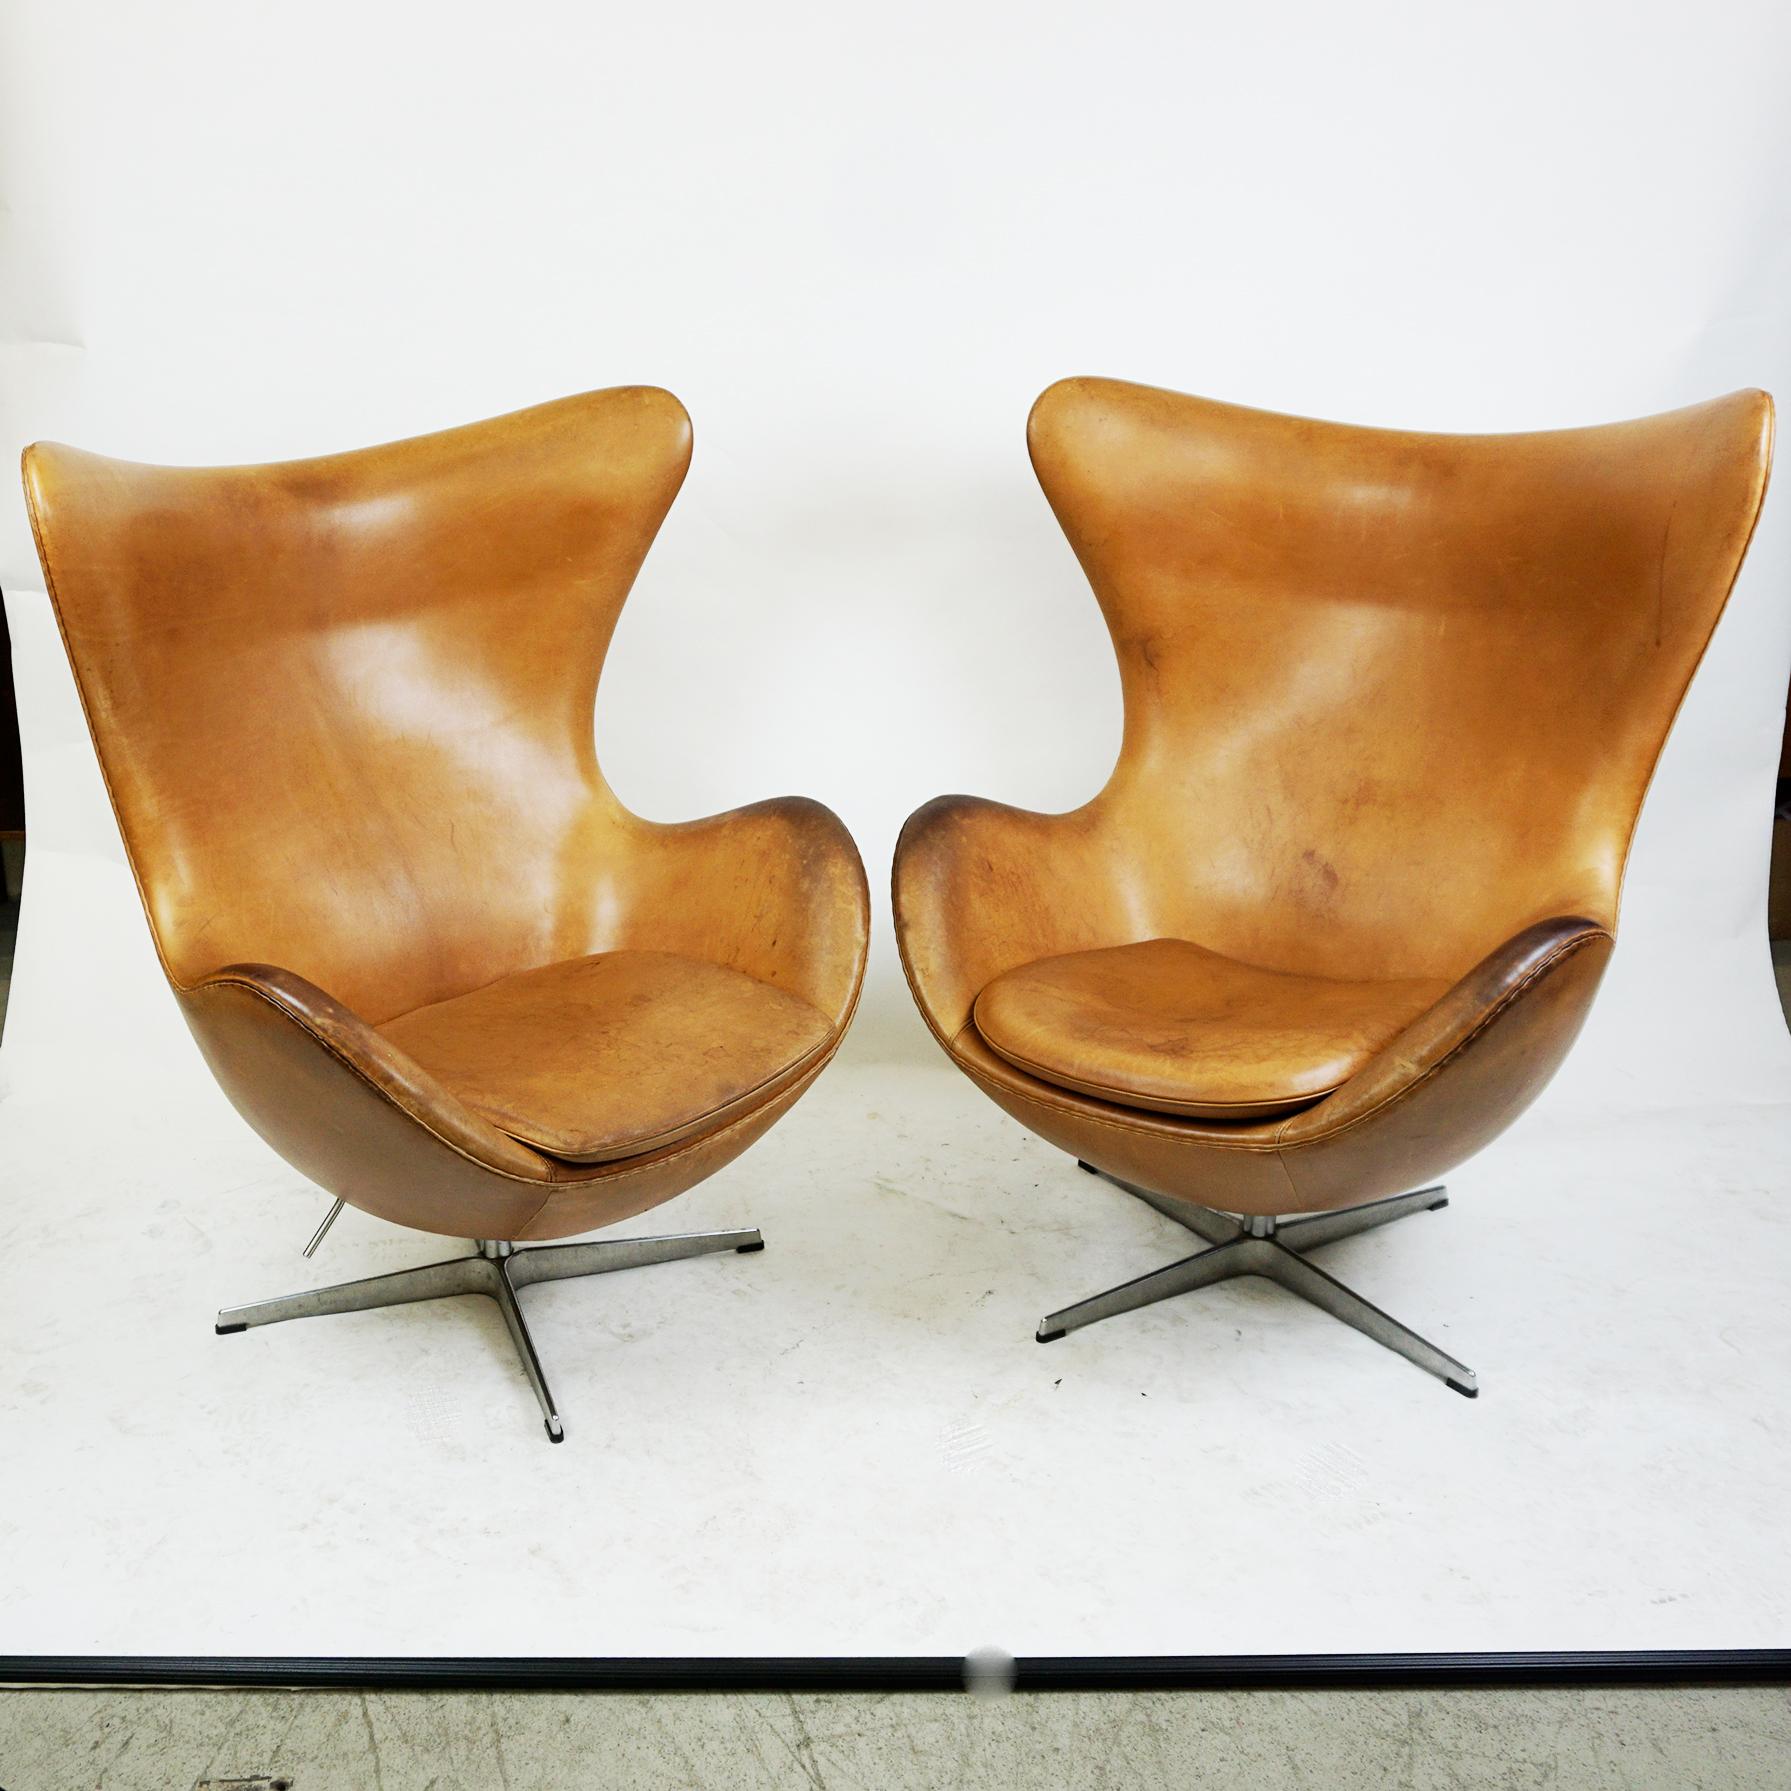 This iconic swivelling lounge chair was designed by Arne Jacobsen 1958 for the SAS Royal Copenhagen Hotel in Denmark and is one of the most famous chairs in the world recognized by design lovers in all countries as the egg chair.
It is the